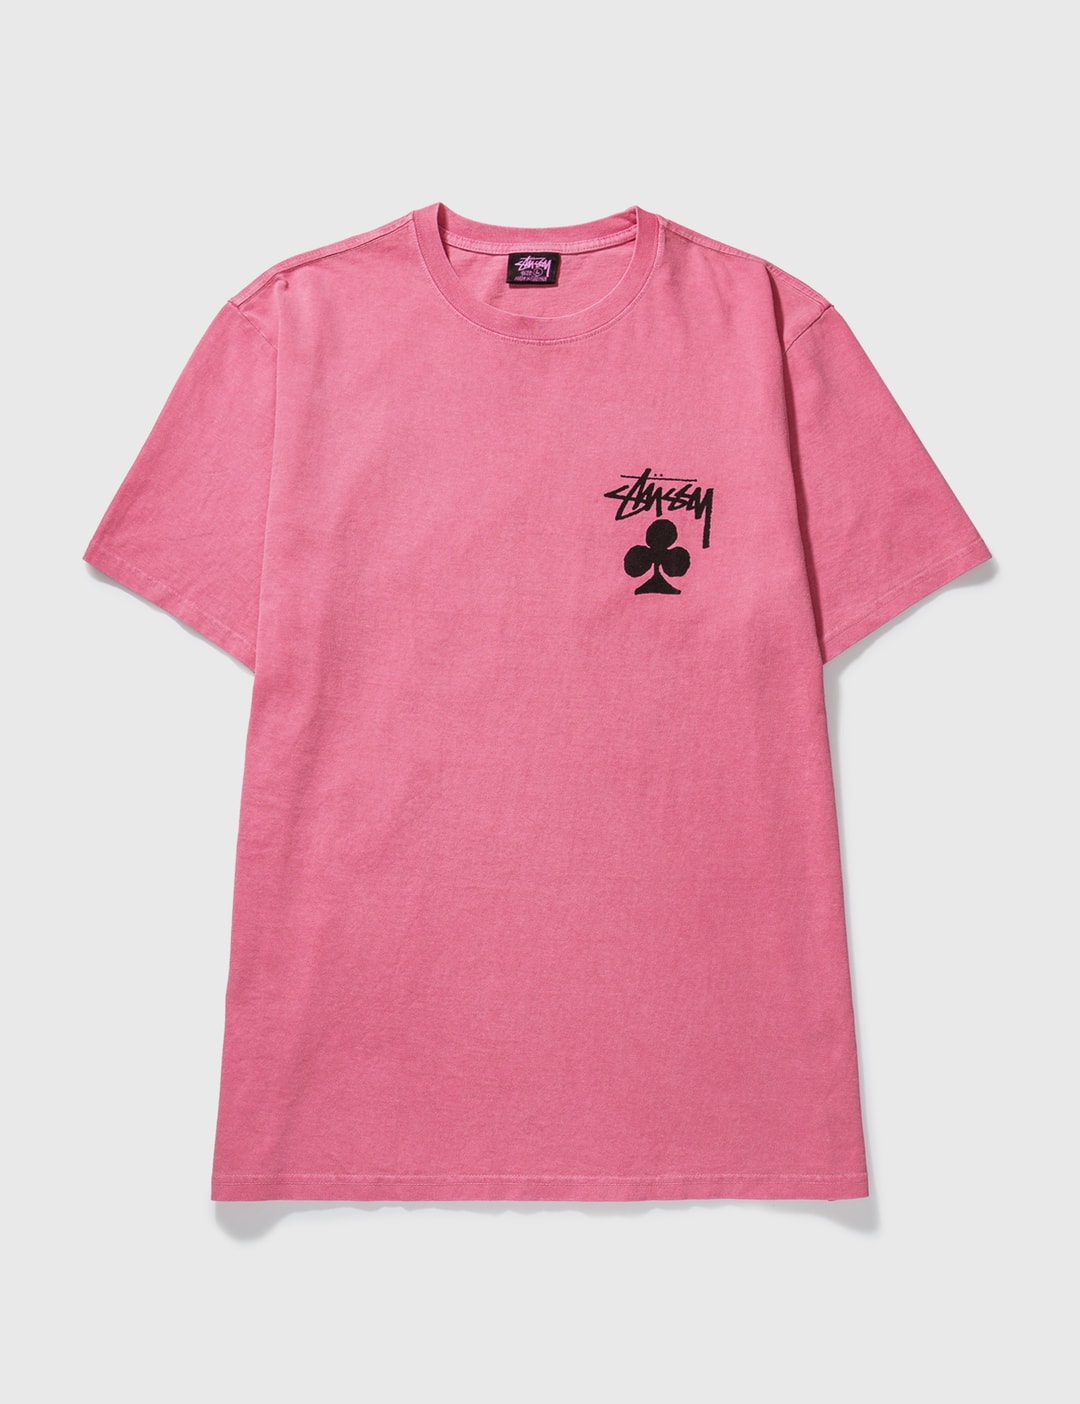 Stüssy - Club Pig. Dyed T-shirt | HBX - Globally Curated Fashion and ...